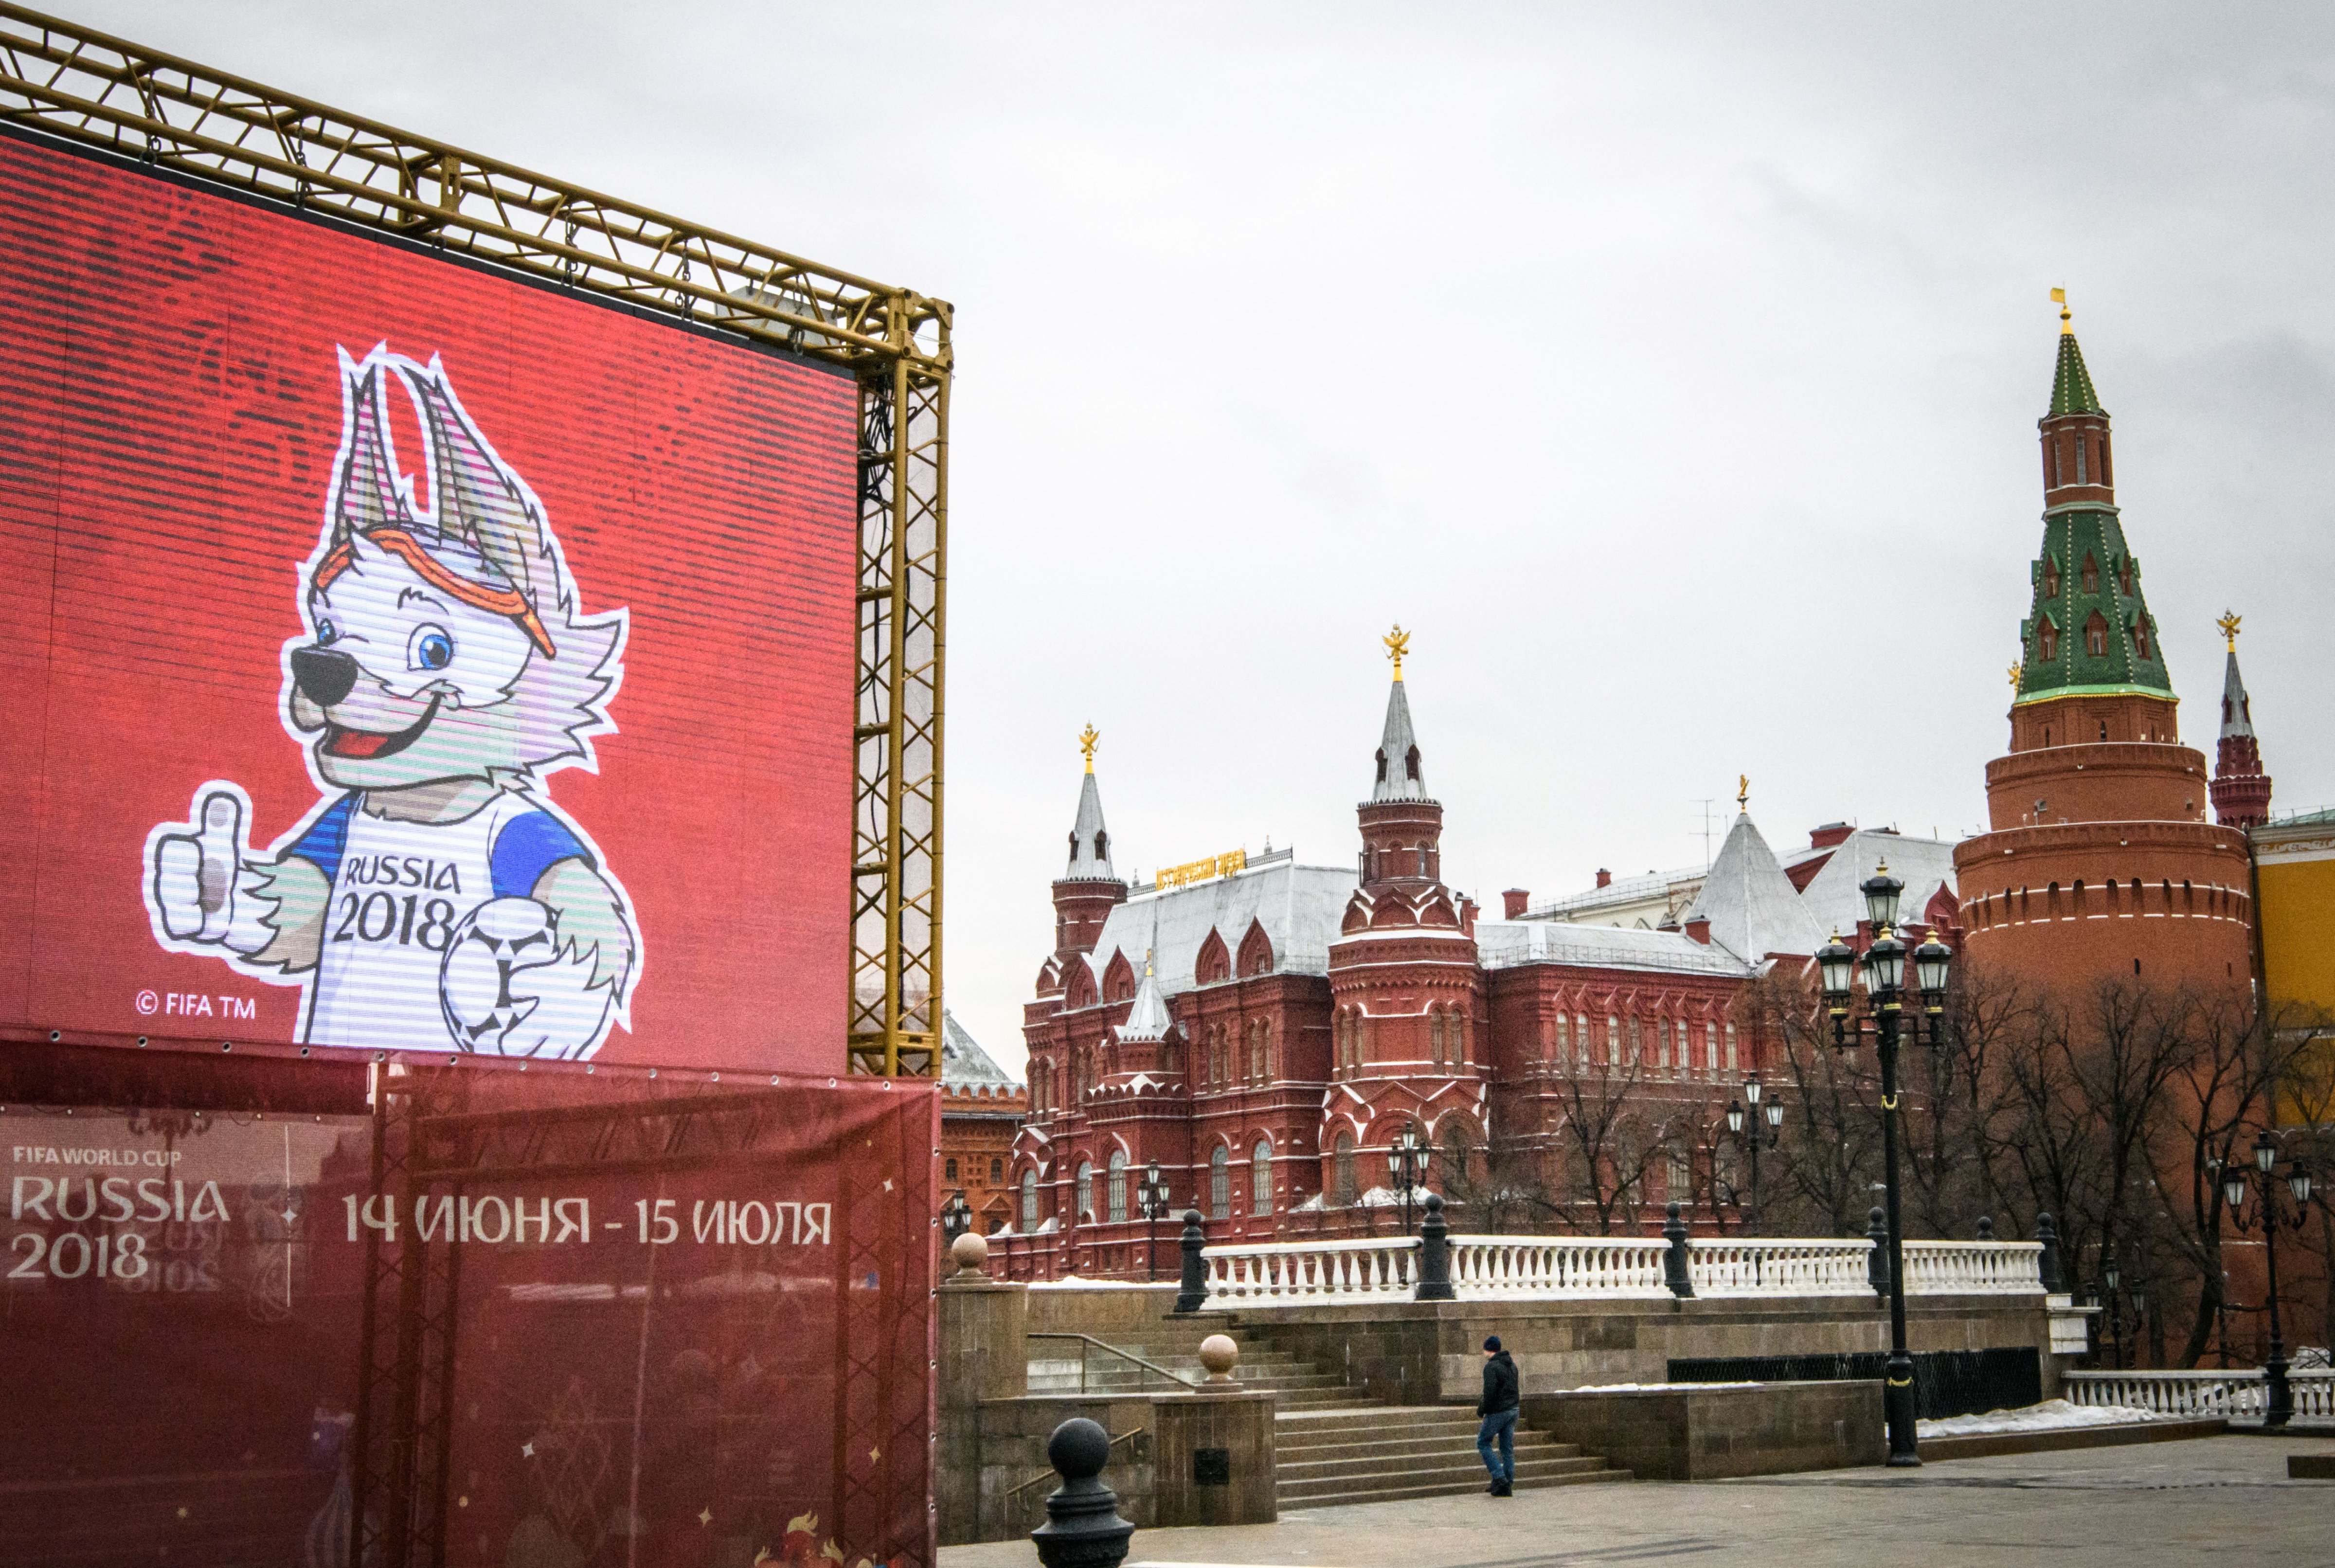 A man takes a photo of a statue of Zabivaka, the official mascot for the 2018 FIFA World Cup, in Manezhnaya square in downtown Moscow on April 2, 2018. MLADEN ANTONOV/AFP/Getty Images (MLADEN ANTONOV&mdash;AFP/Getty Images)